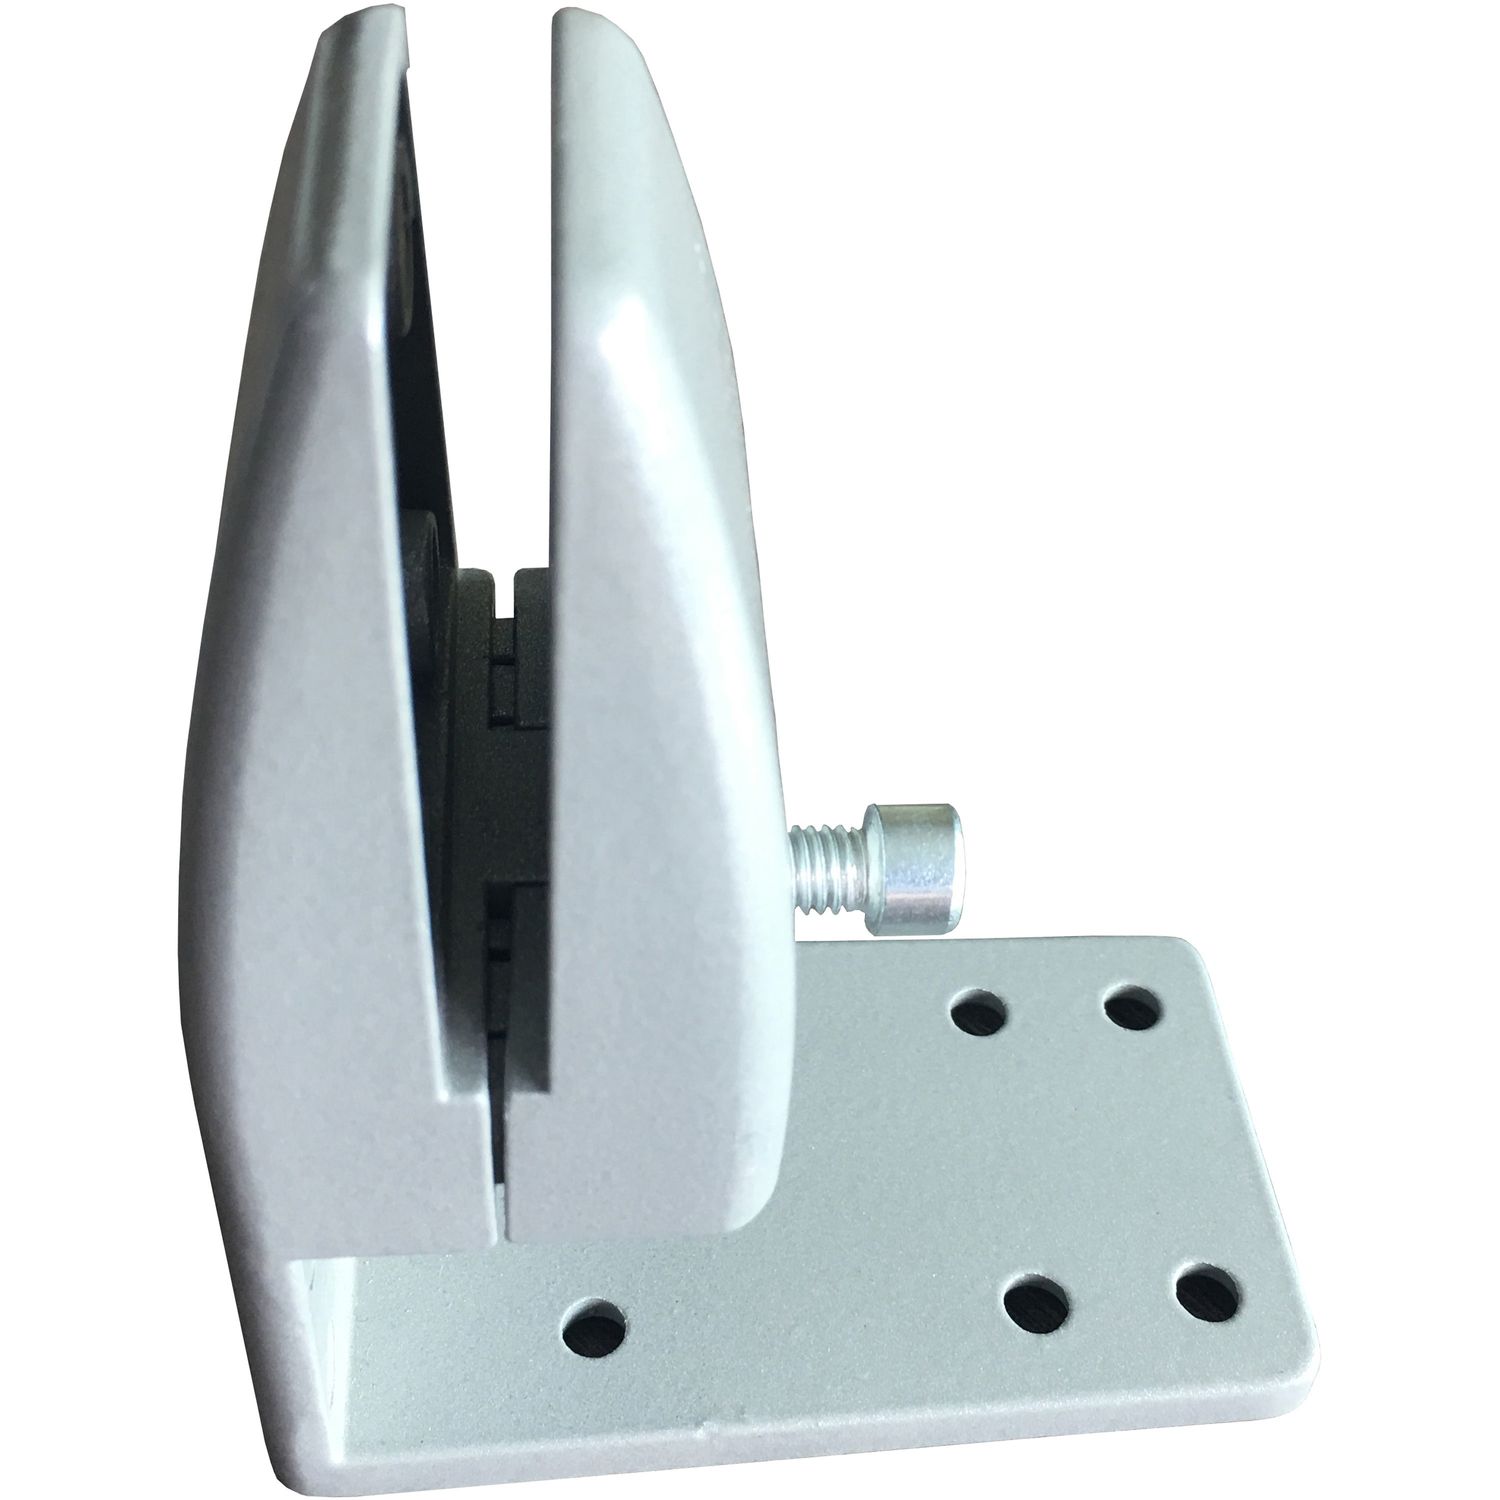 Simple System Modesty Panel Bottom Mounting Bracket 1.8" Width x 1.3" Depth x 2.4" Height, Metal, Silver, Driftwood